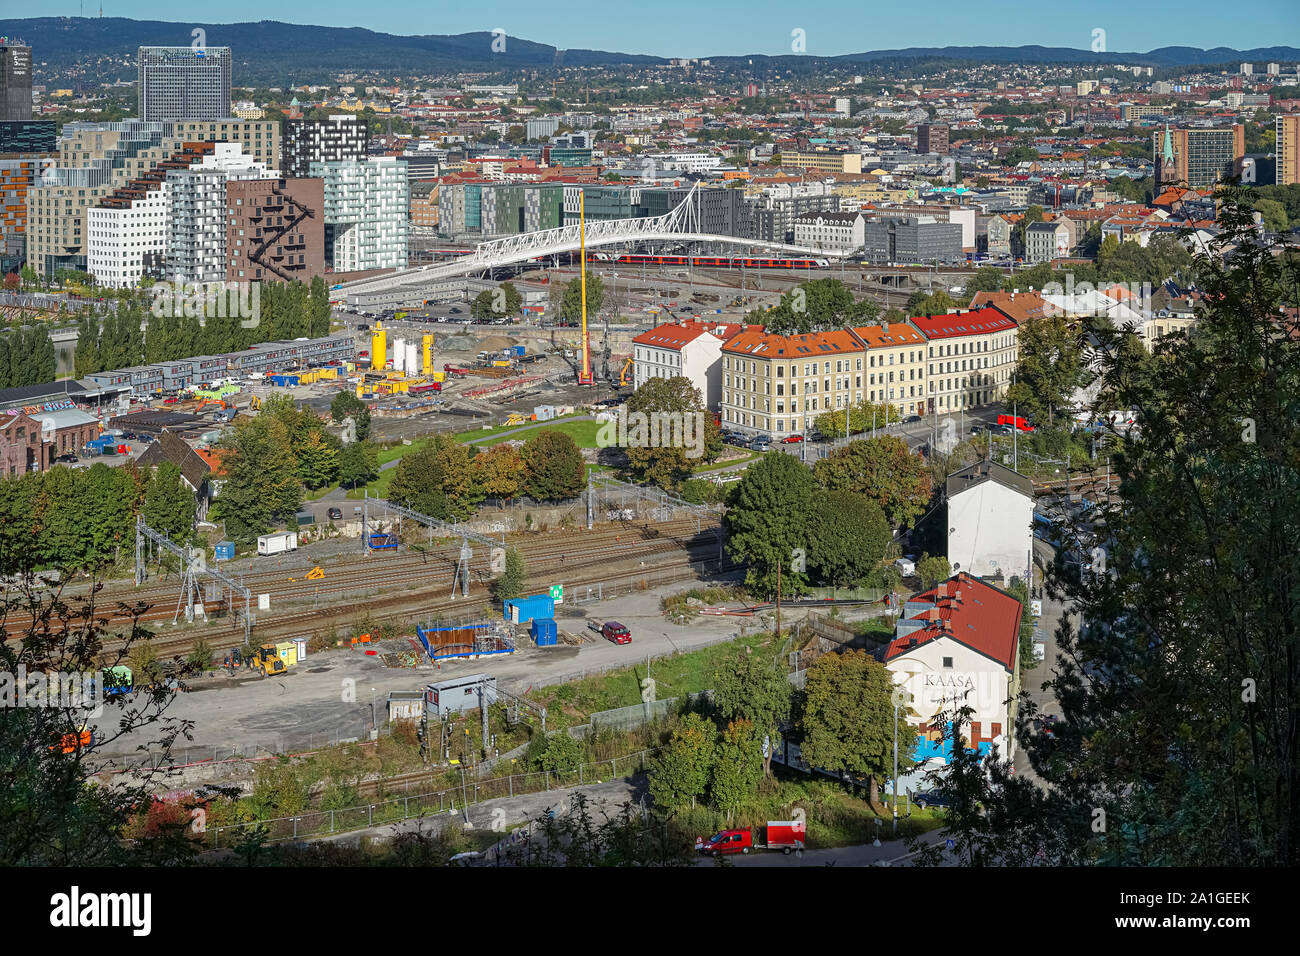 Panorama view of central Oslo with the Barcode Project and railway station from Utsikten, Ekebergparken Sculpture Park, Norway. Stock Photo